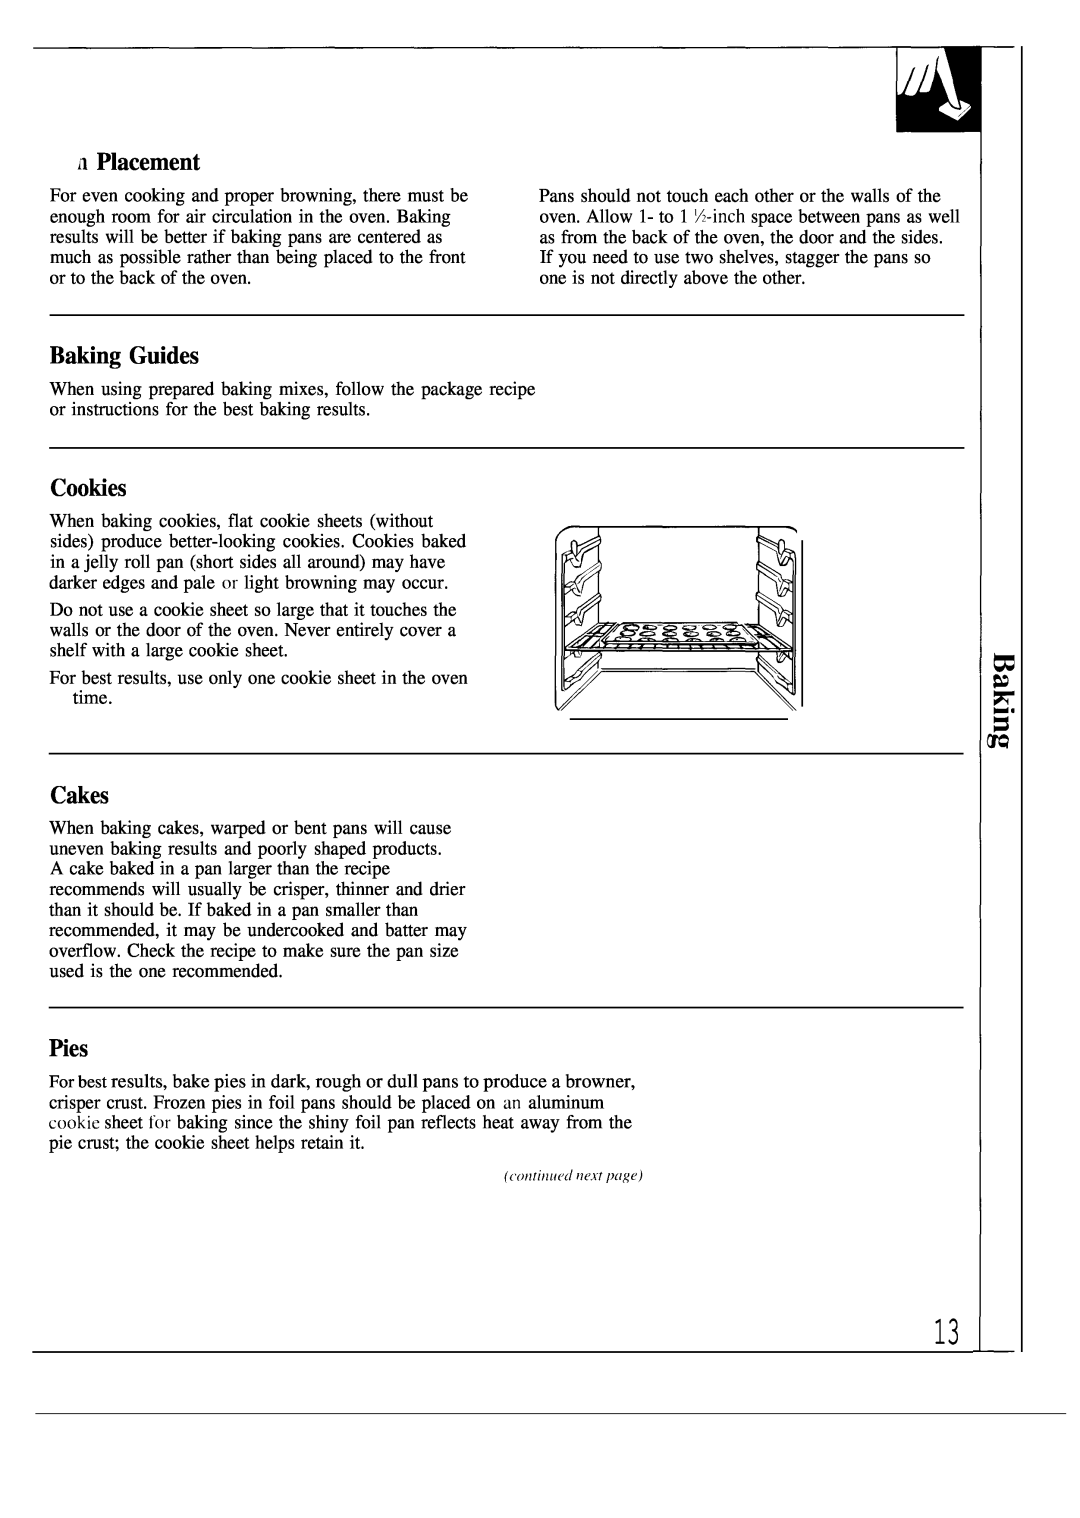 GE 164D2966P053, JGSC12 operating instructions n Placement, Baking Guides, Cookies, Cakes, Pies 